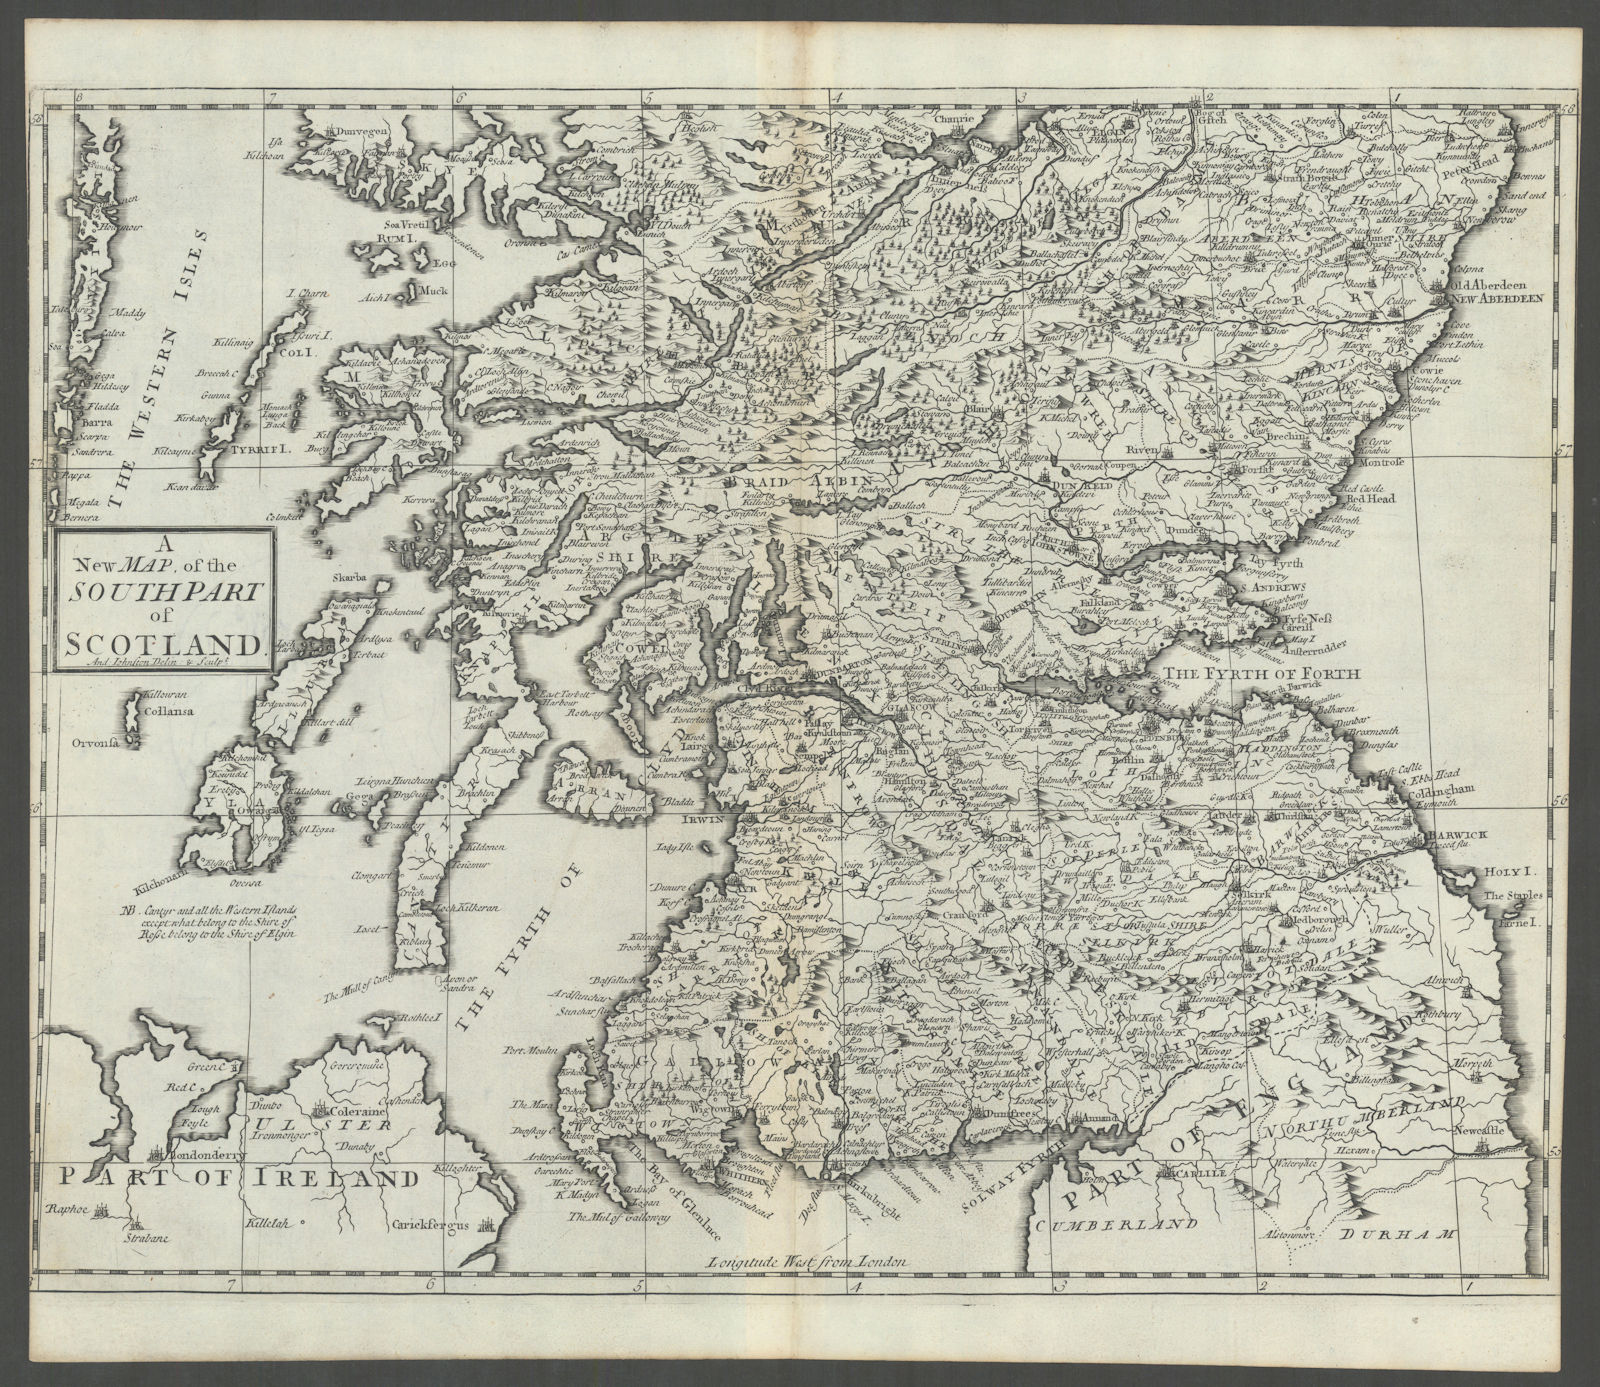 Associate Product SOUTHERN SCOTLAND by ANDREW JOHNSTON from Camden's Britannia 1722 old map